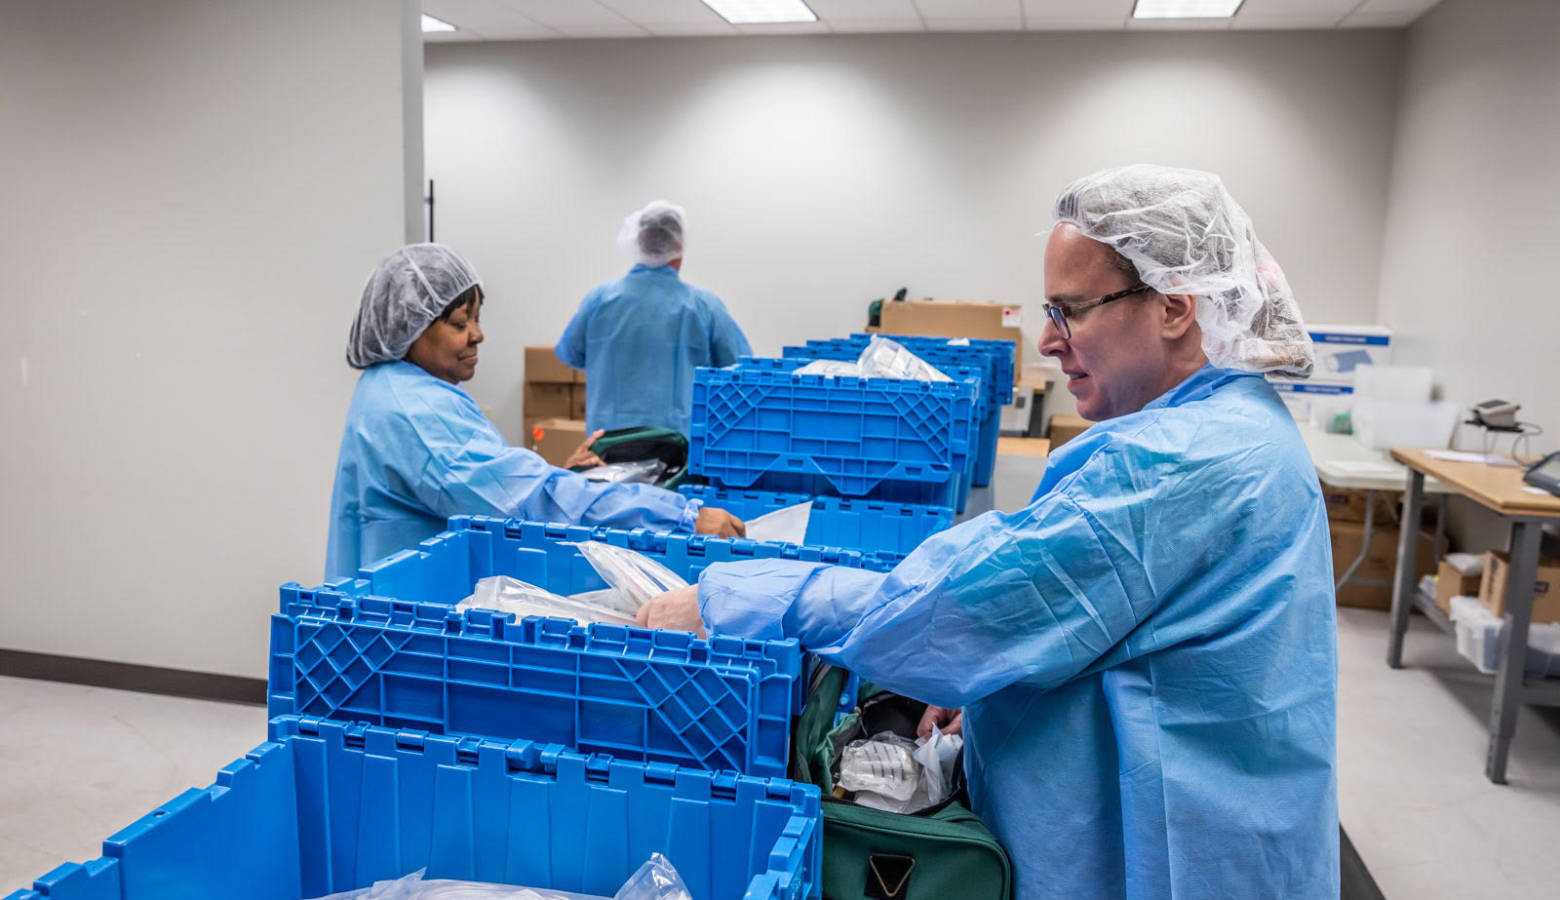 Workers at Bosma Enterprises with visual impairments packaging products. (Courtesy of Bosma Enterprises)